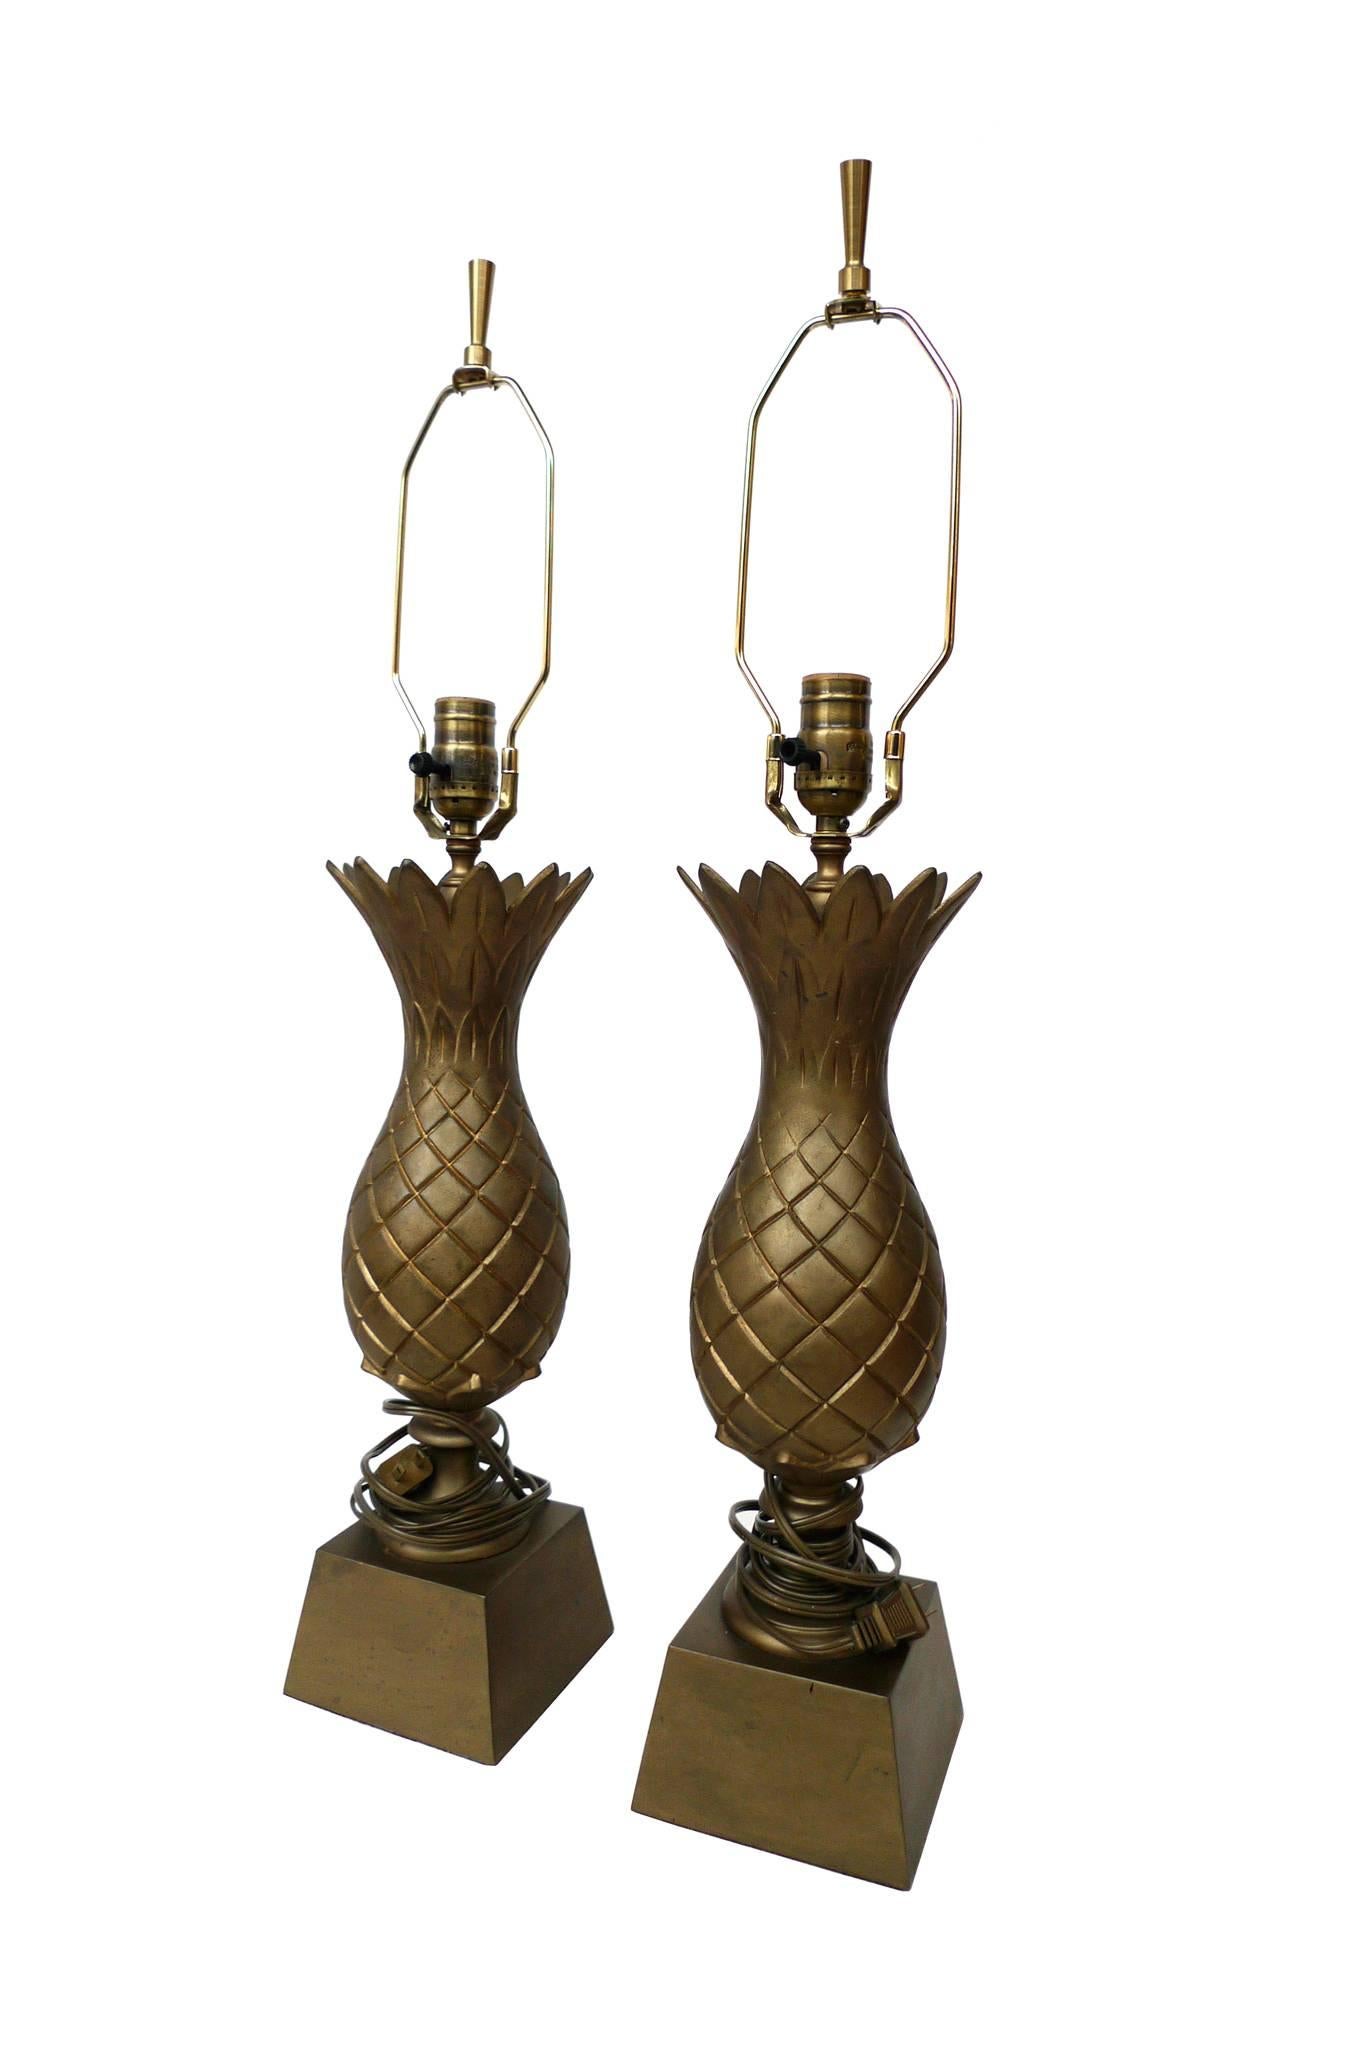 These excellent brass table lamps are a pineapple shape. They are paired with new black shades in a square taper that beautifully complement the brass base. The lamps have a single bulb socket with a knob switch. 

28 3/4